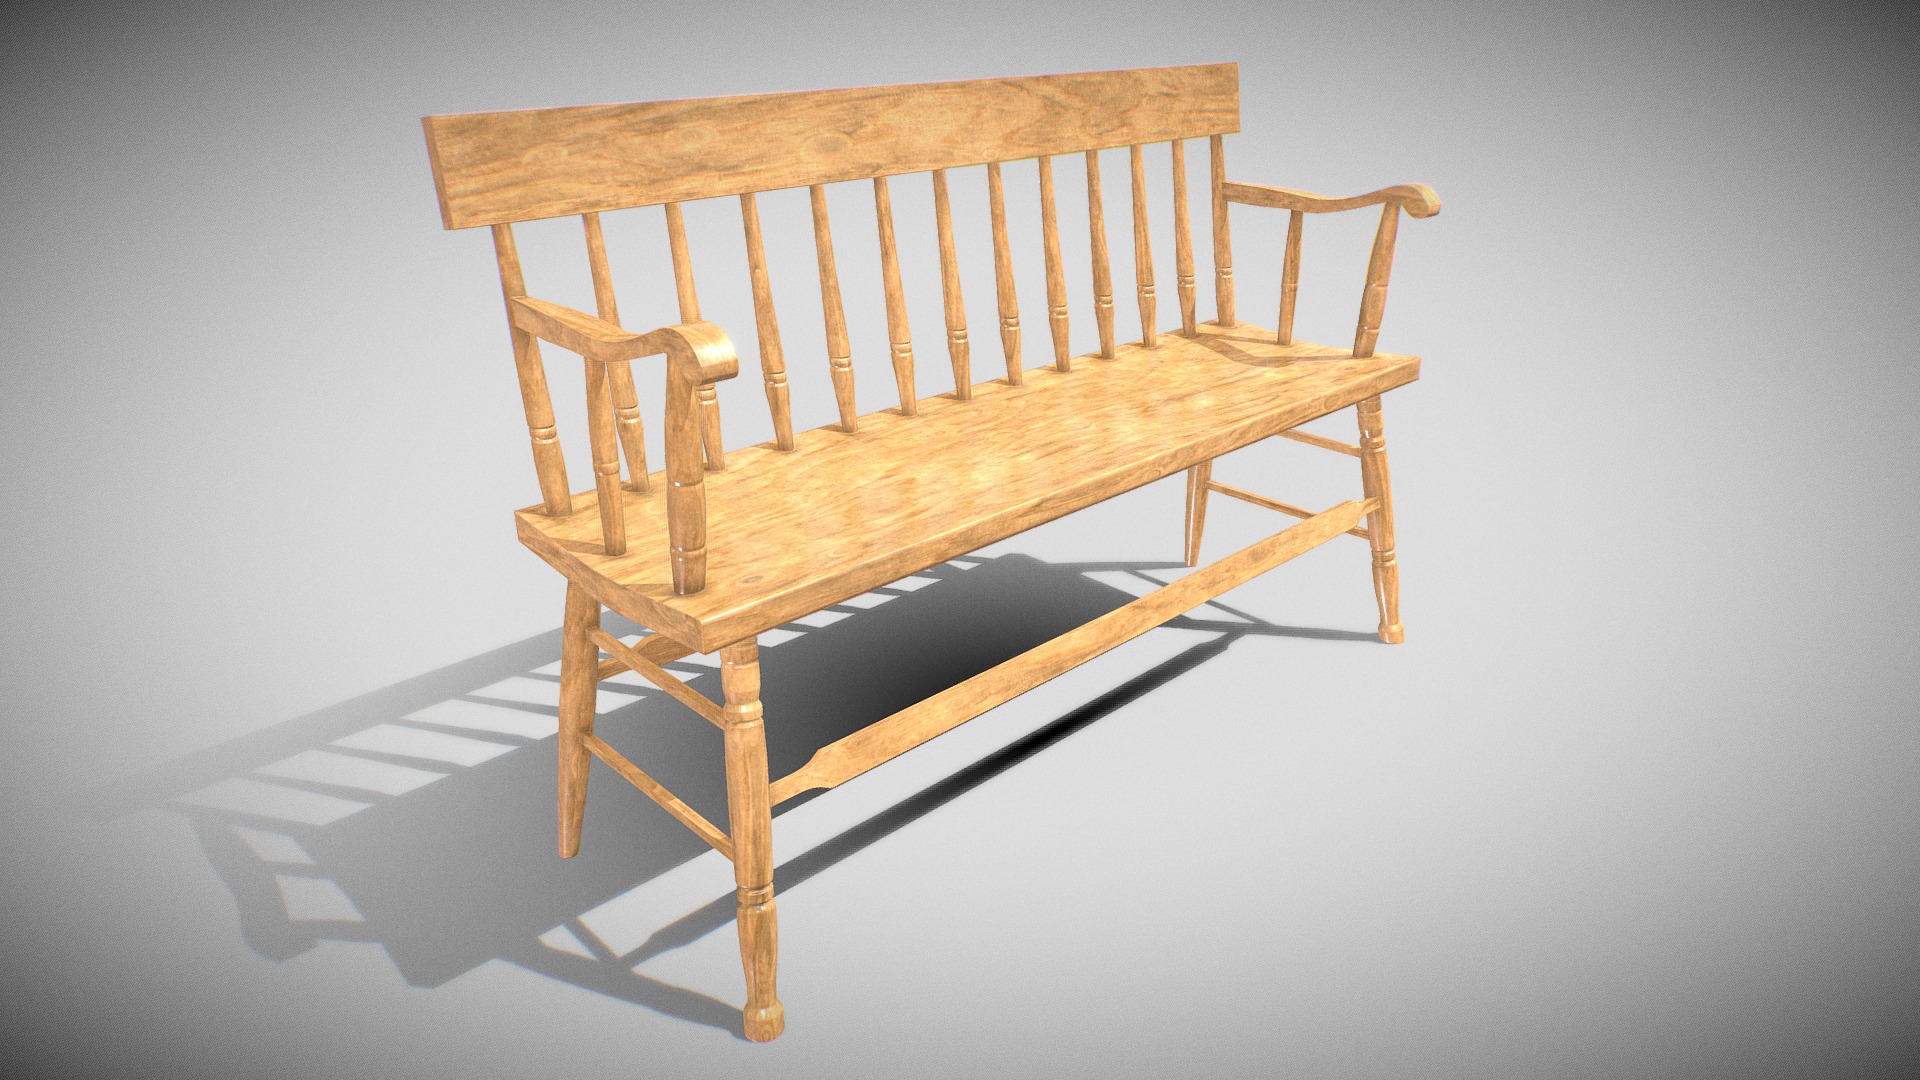 3D model Furniture Bench V01 - This is a 3D model of the Furniture Bench V01. The 3D model is about a wooden bench on a white background.